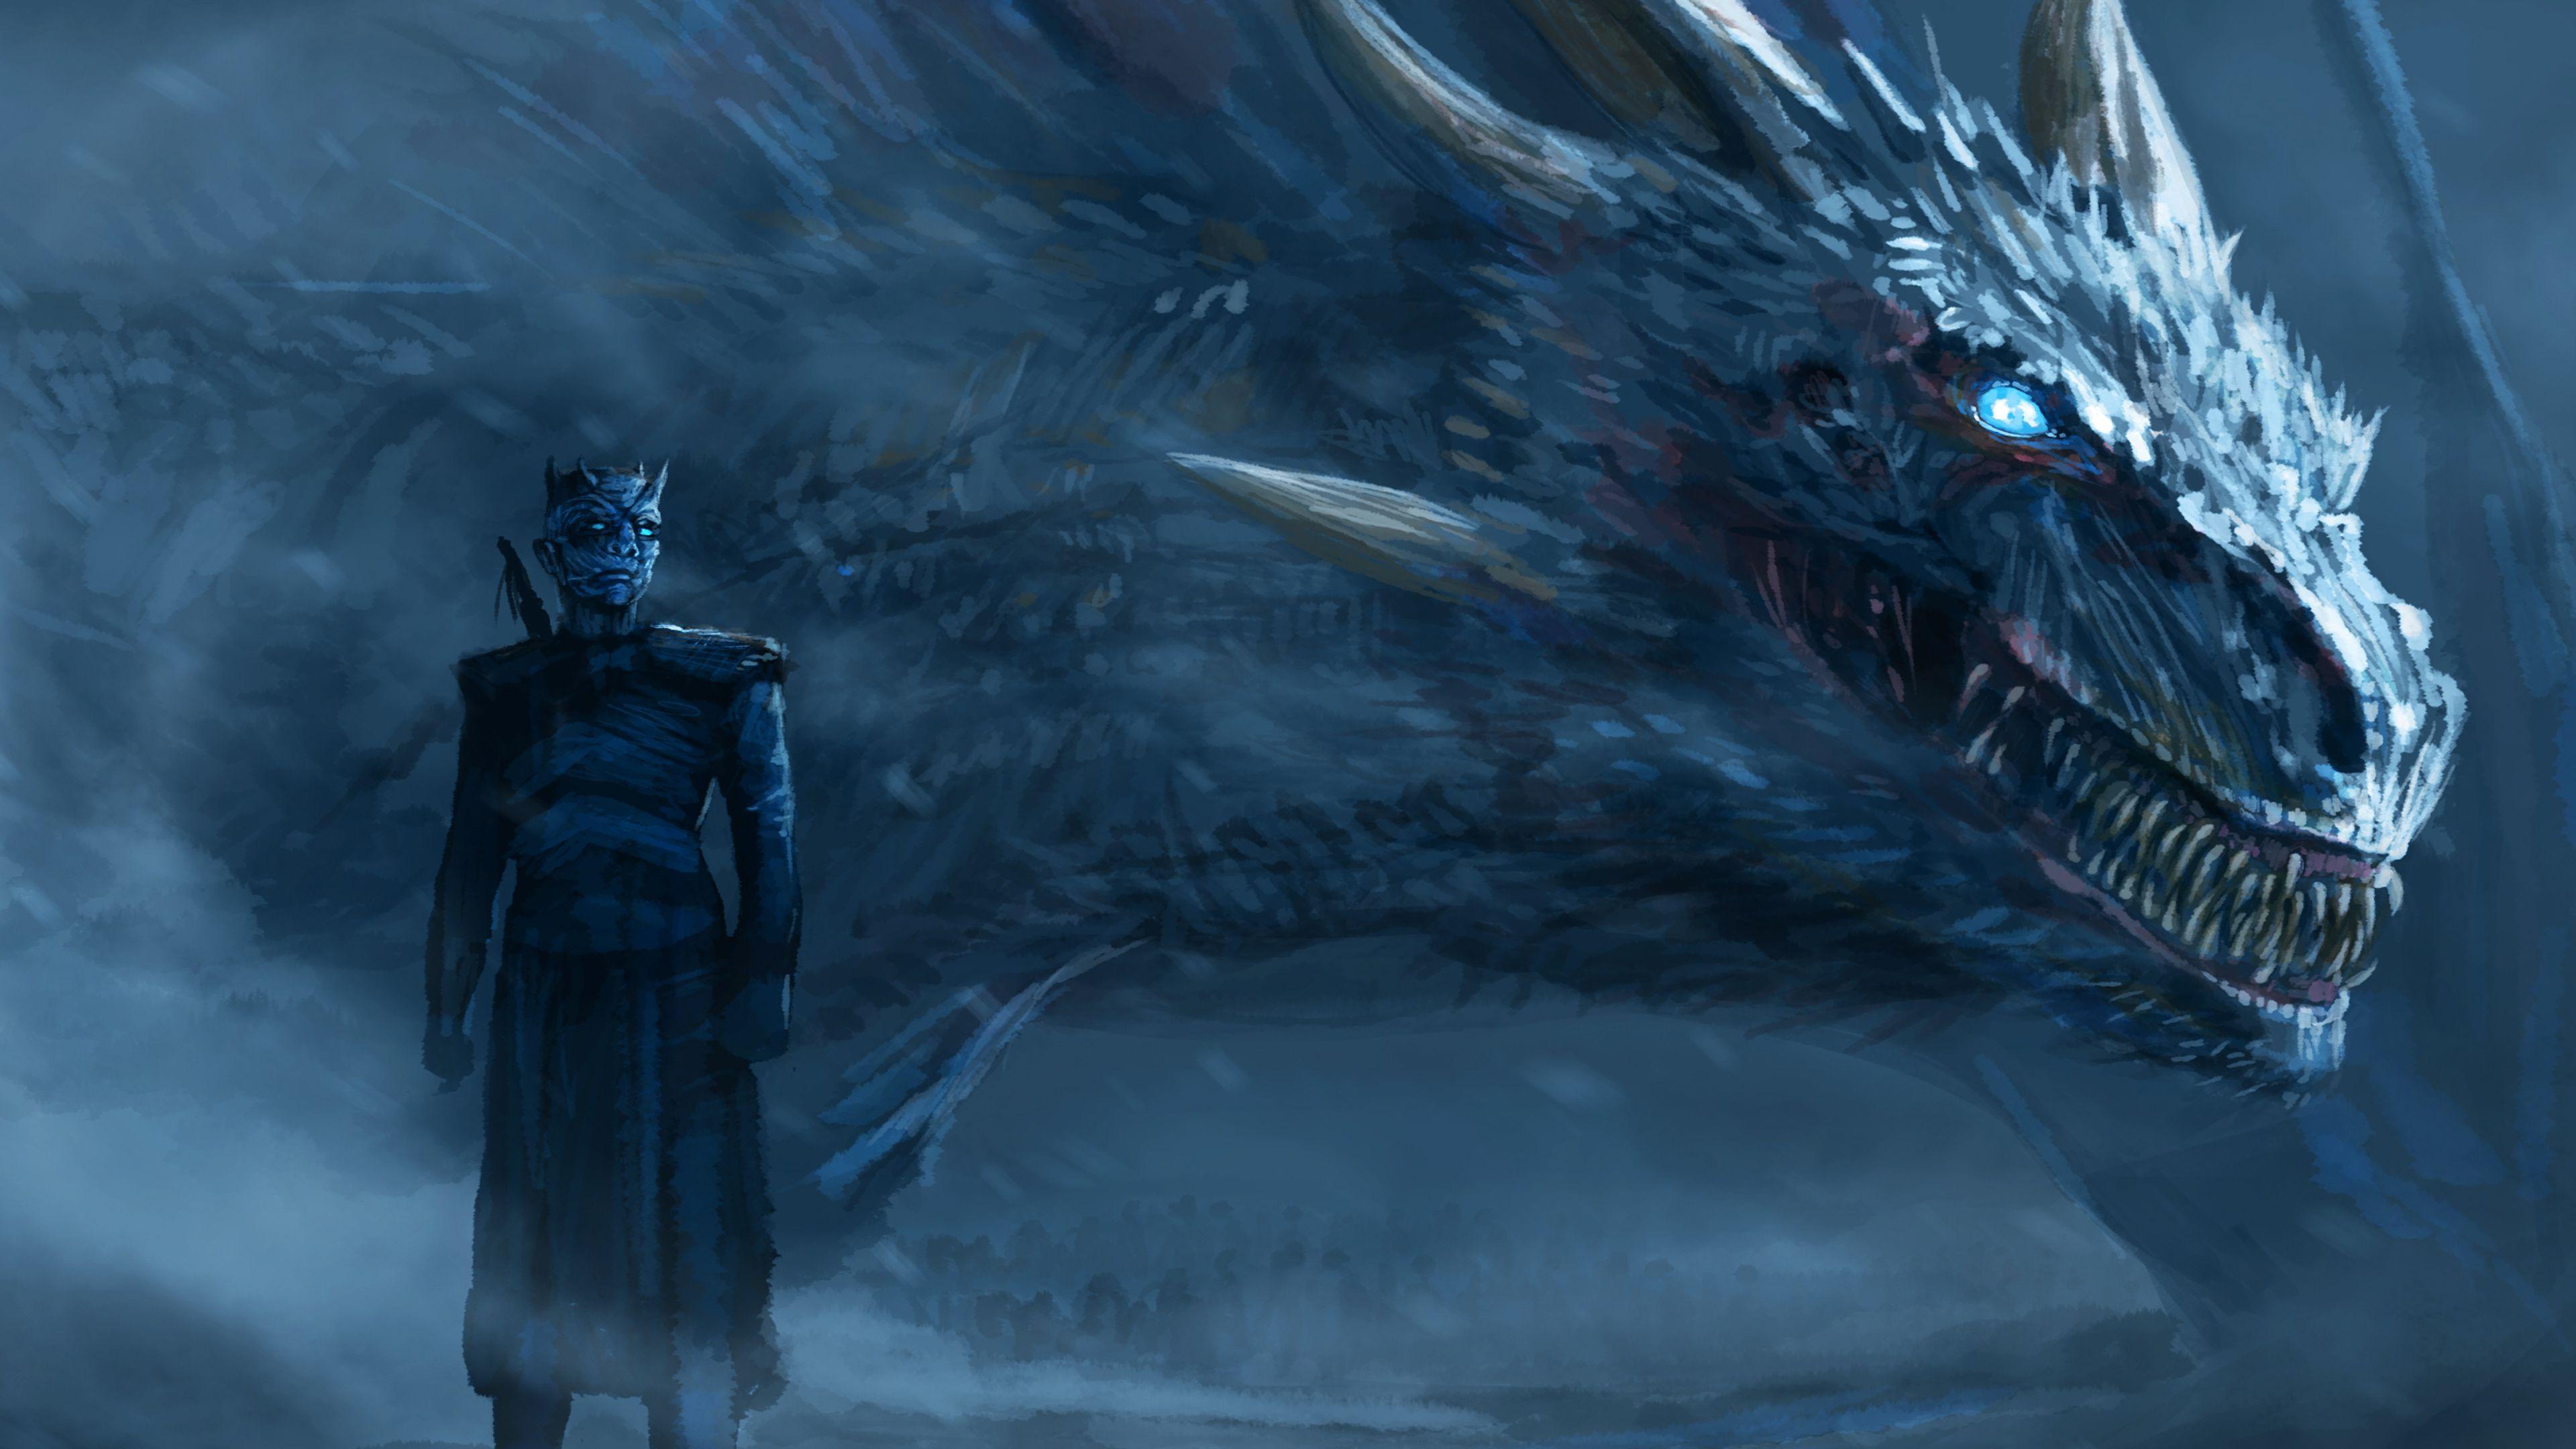 Game of Thrones Dragons Wallpaper Free Game of Thrones Dragons Background